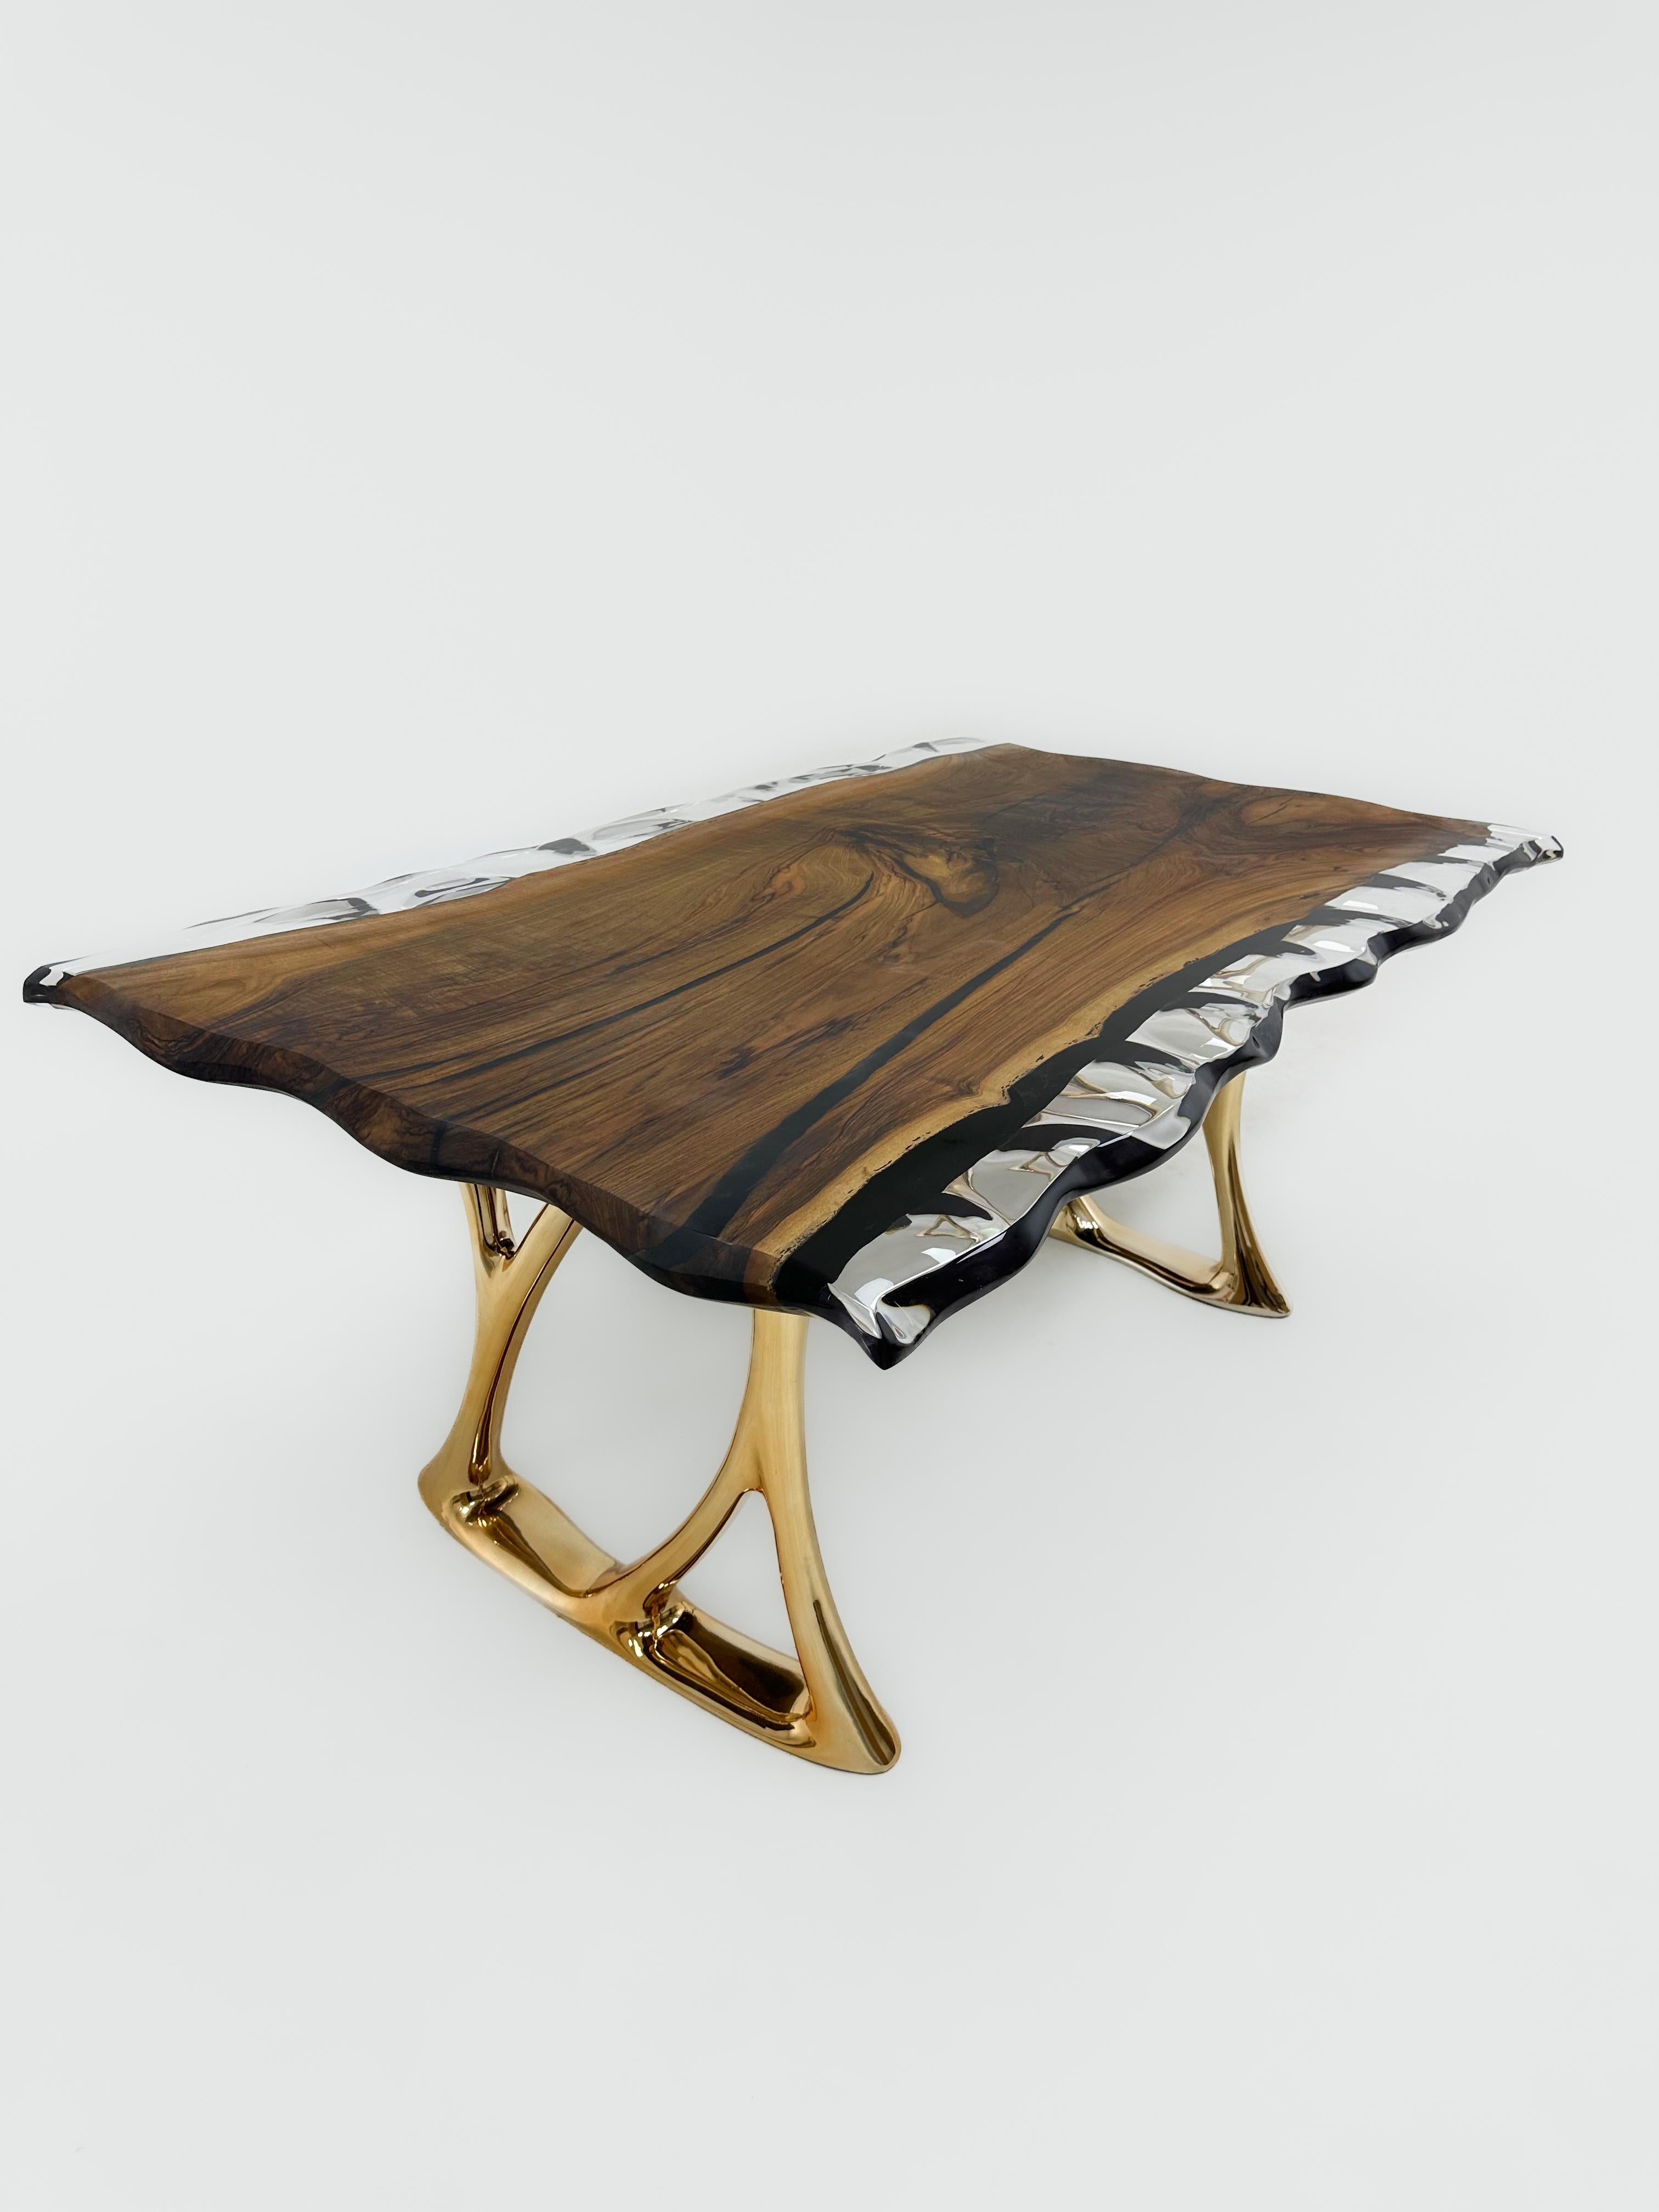 Custom Clear Epoxy Resin Walnut Wood Dining Table - Natural Wood Table (Geschnitzt) im Angebot